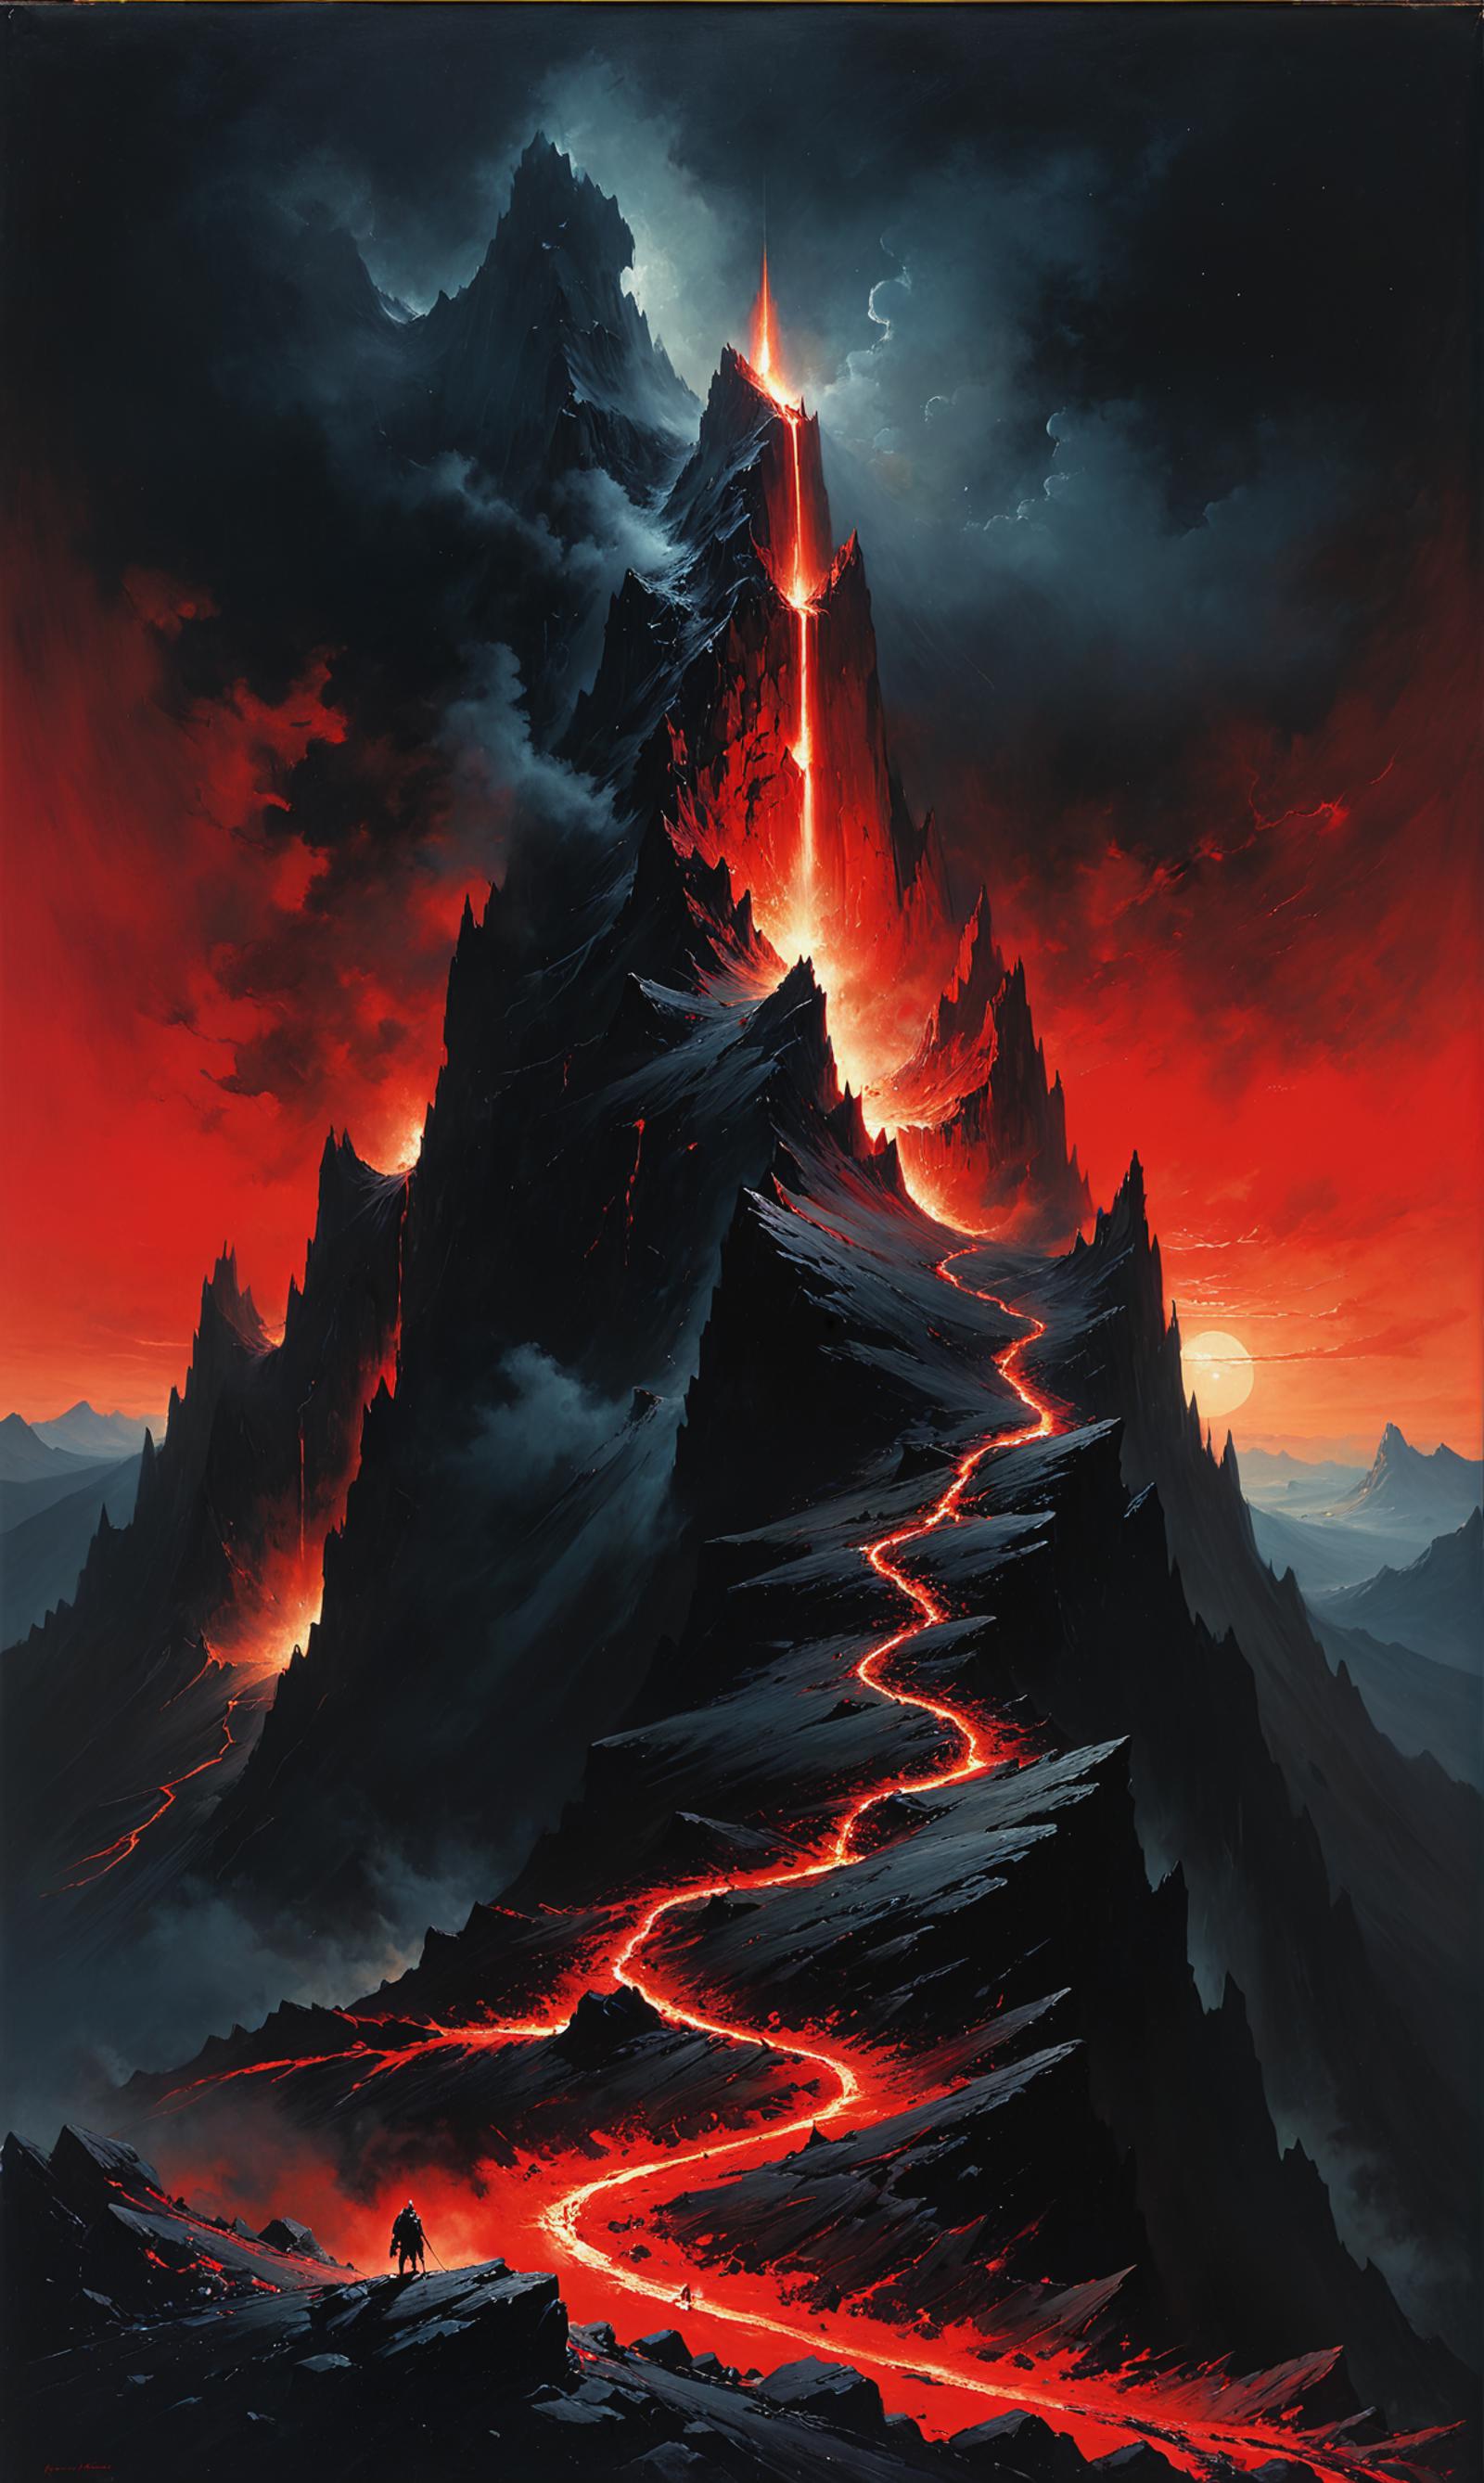 A volcanic mountain with a red glowing trail or path on it.